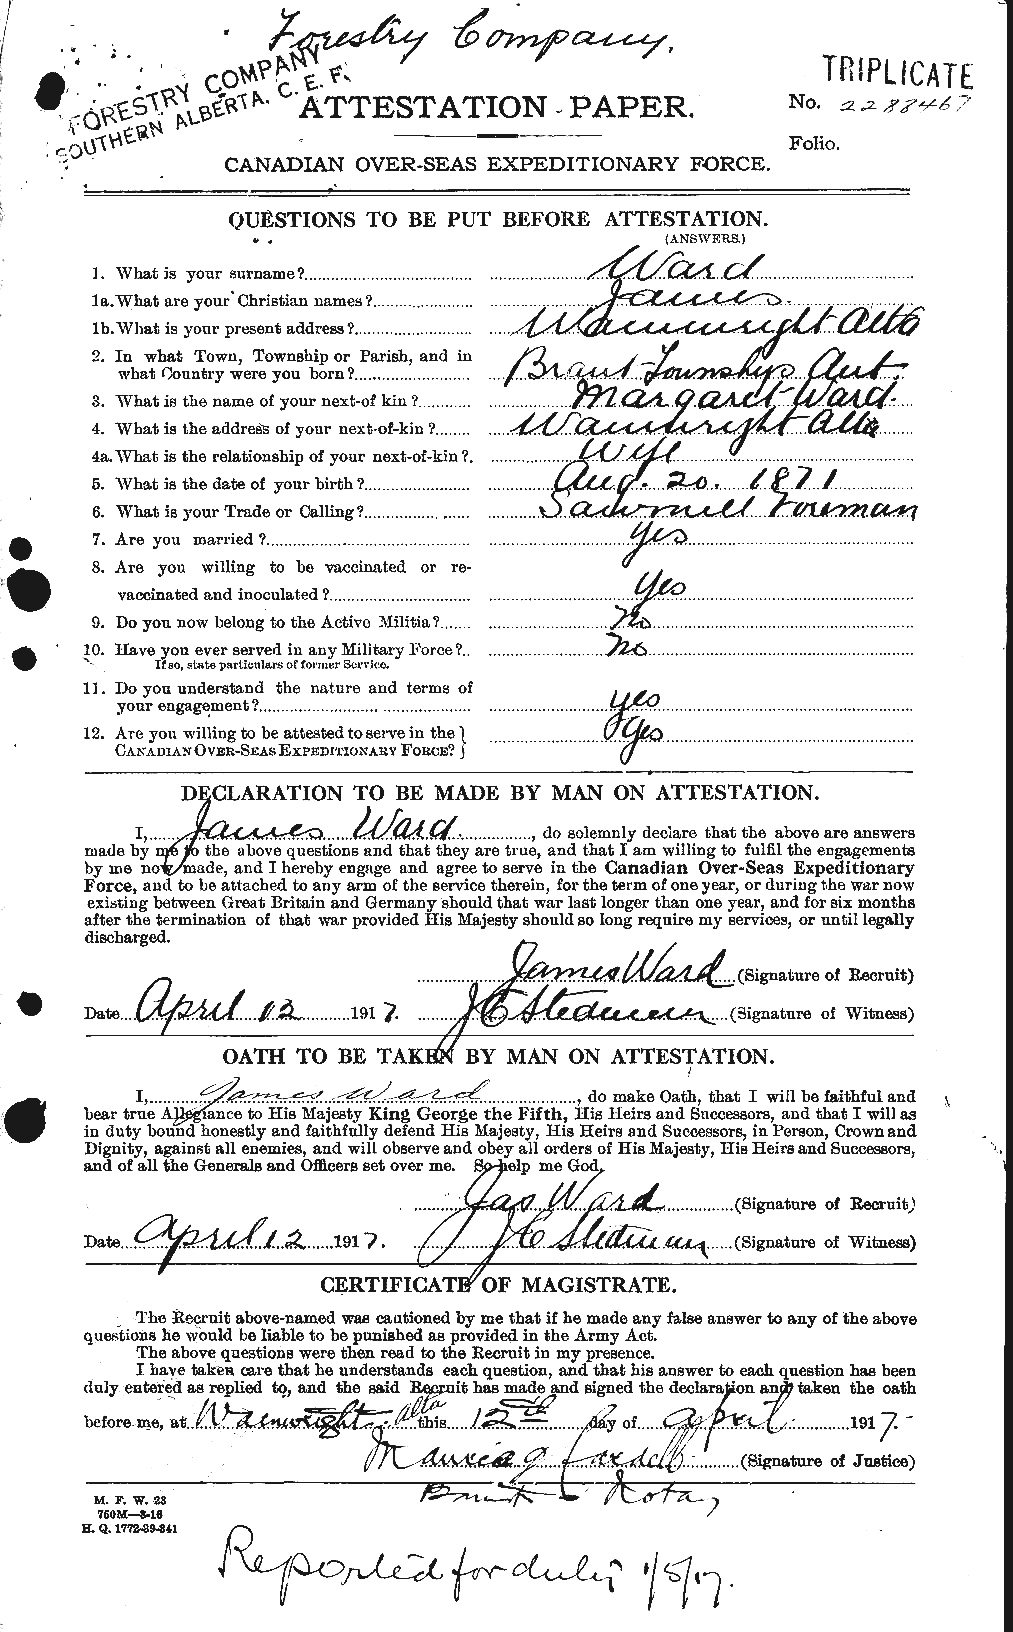 Personnel Records of the First World War - CEF 657883a